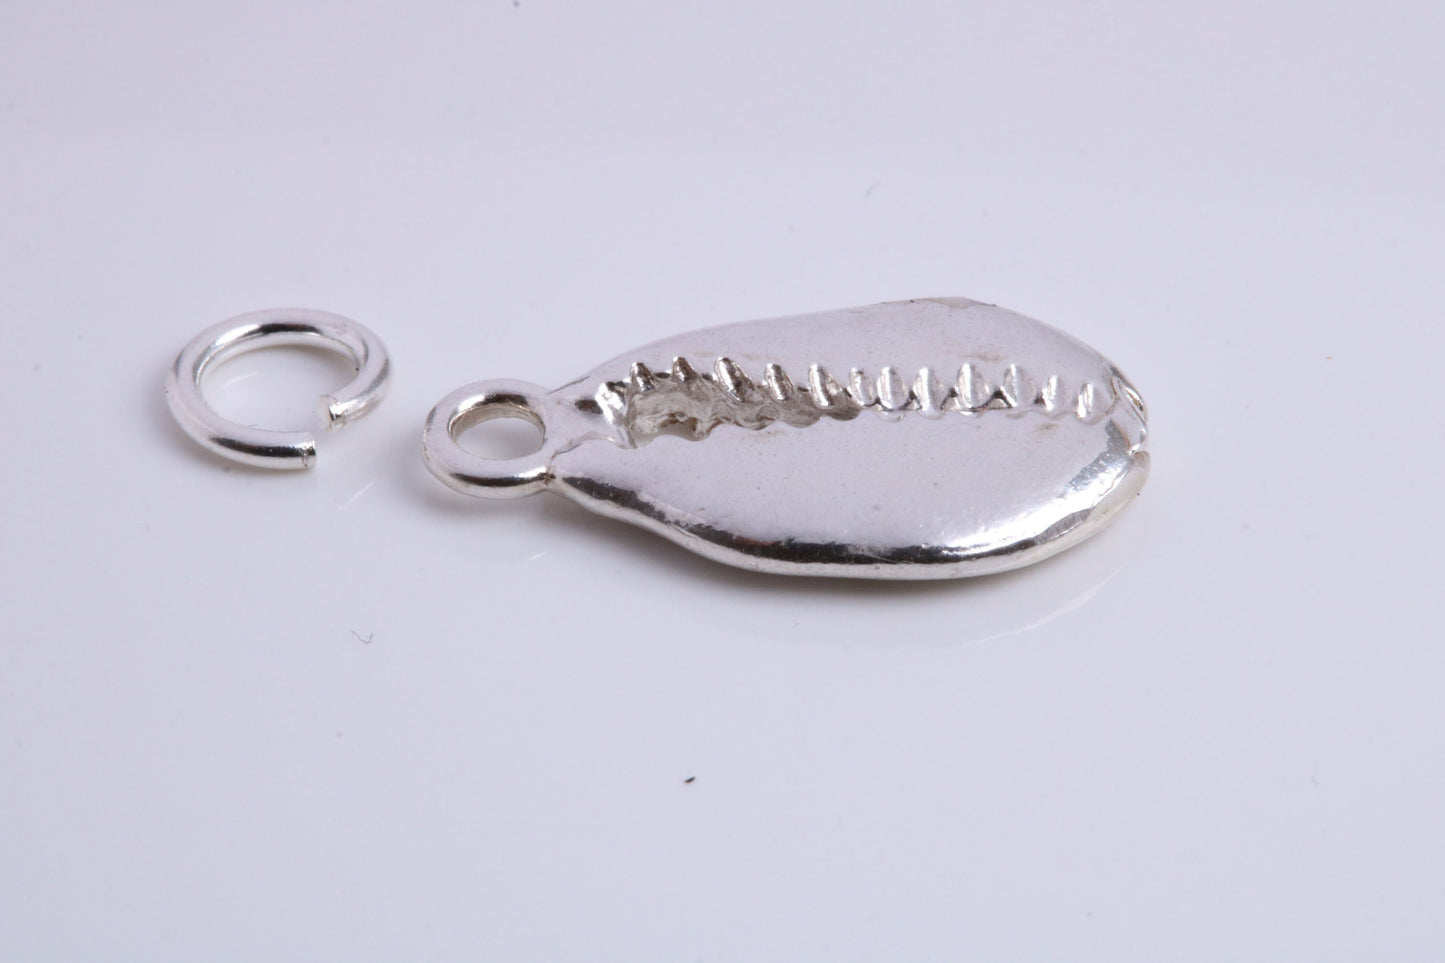 Shark Jaw Charm, Traditional Charm, Made from Solid 925 Grade Sterling Silver, Complete with Attachment Link